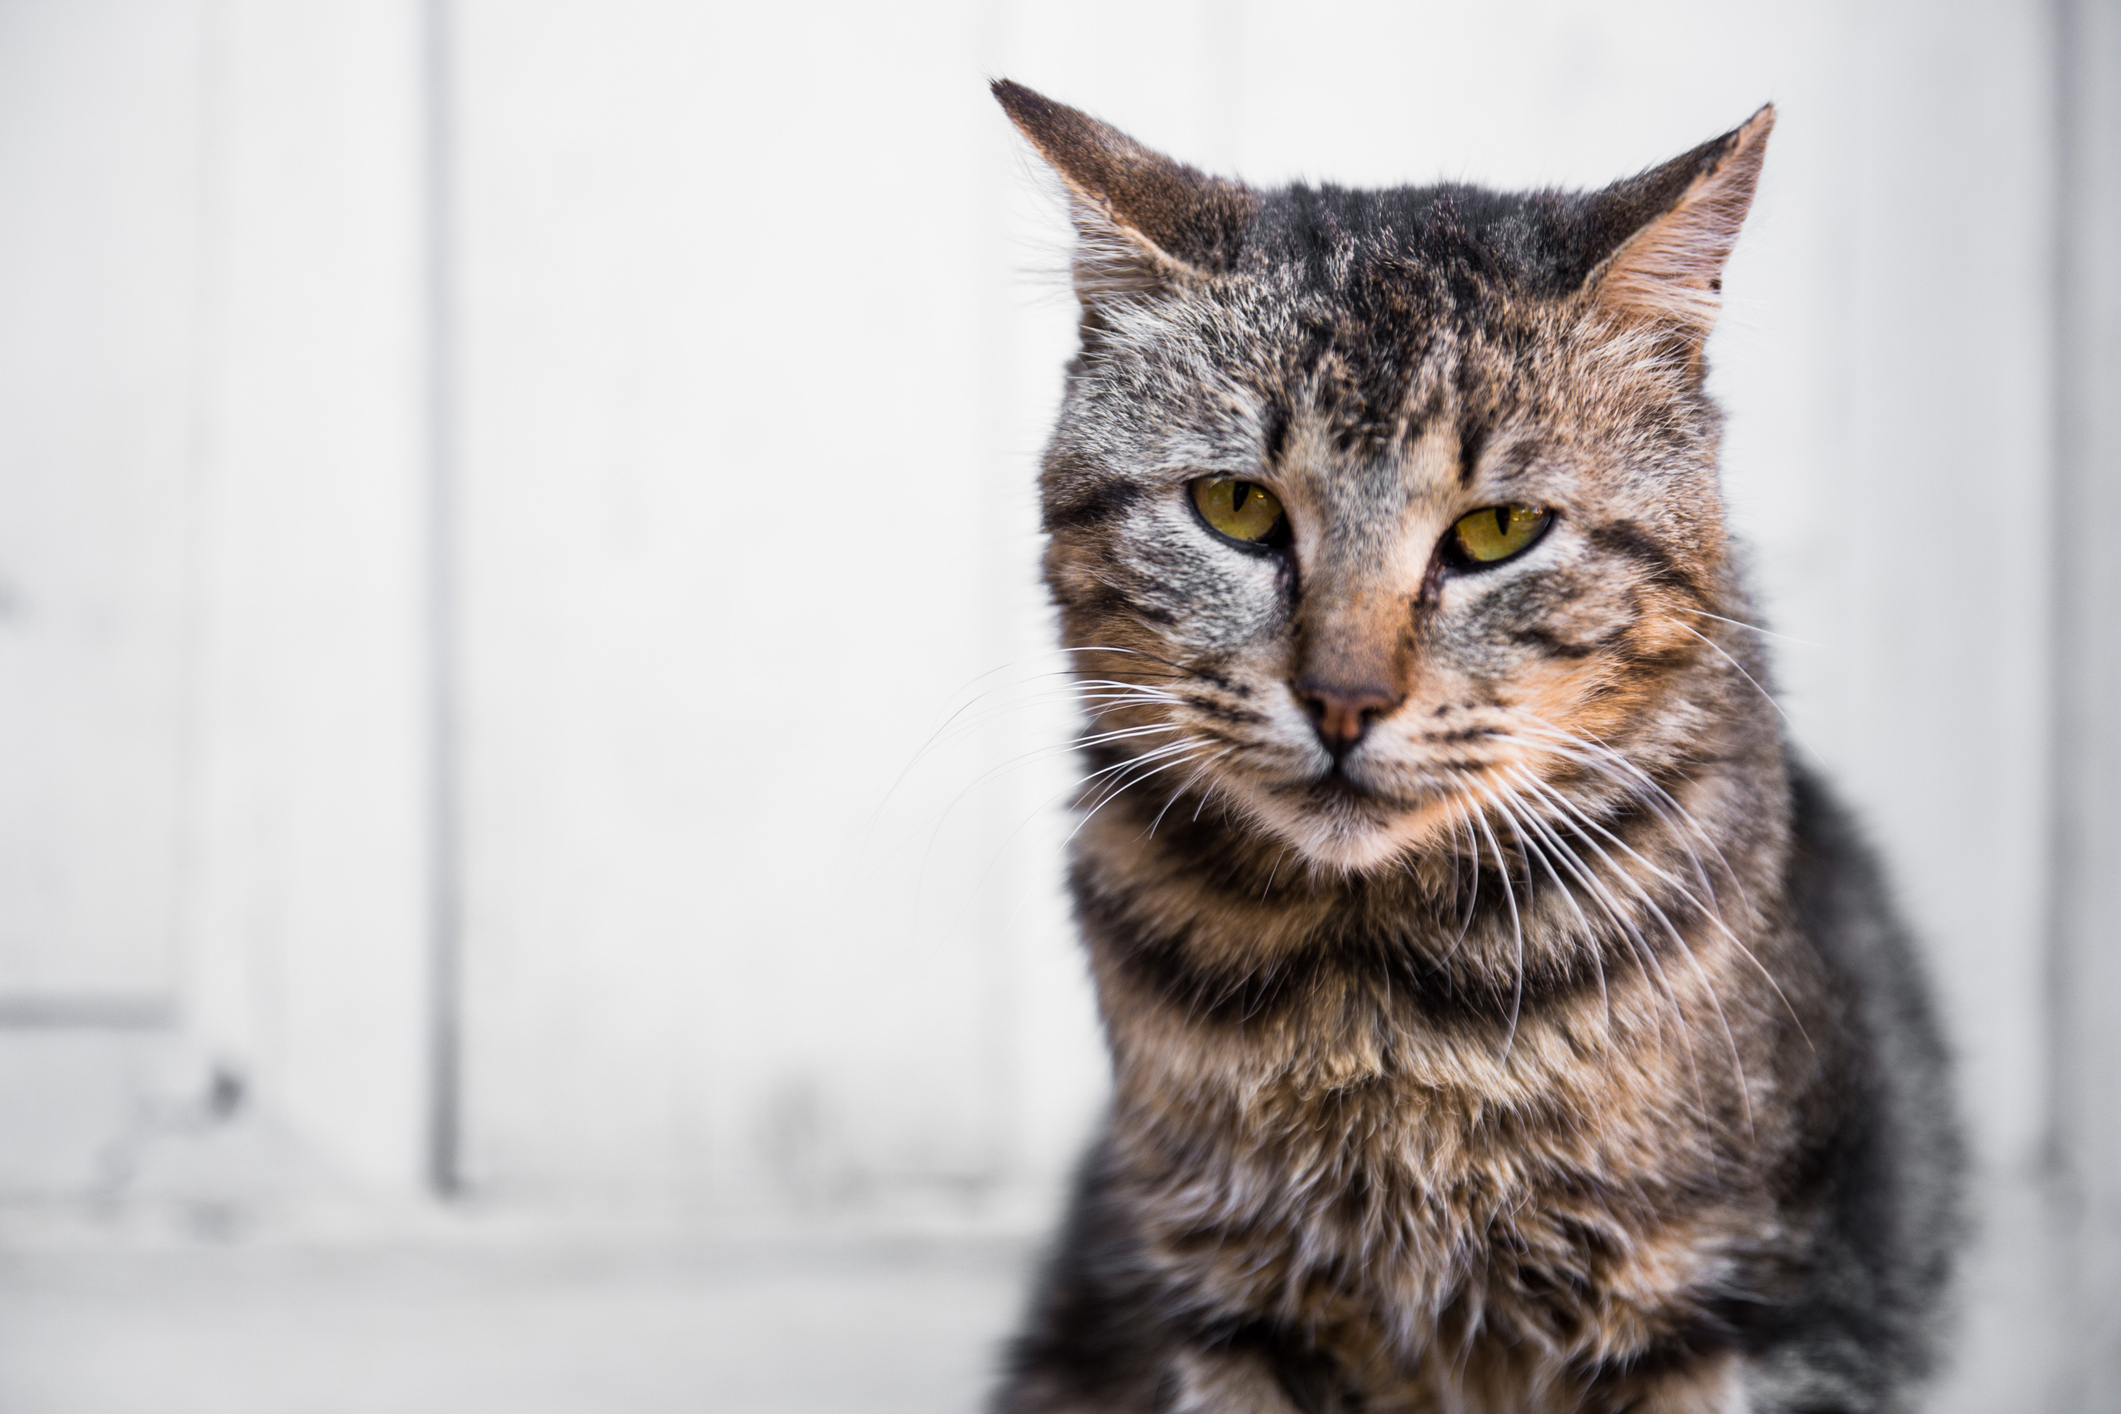 Senior tabby cat with scruffy coat and gray hairs on face